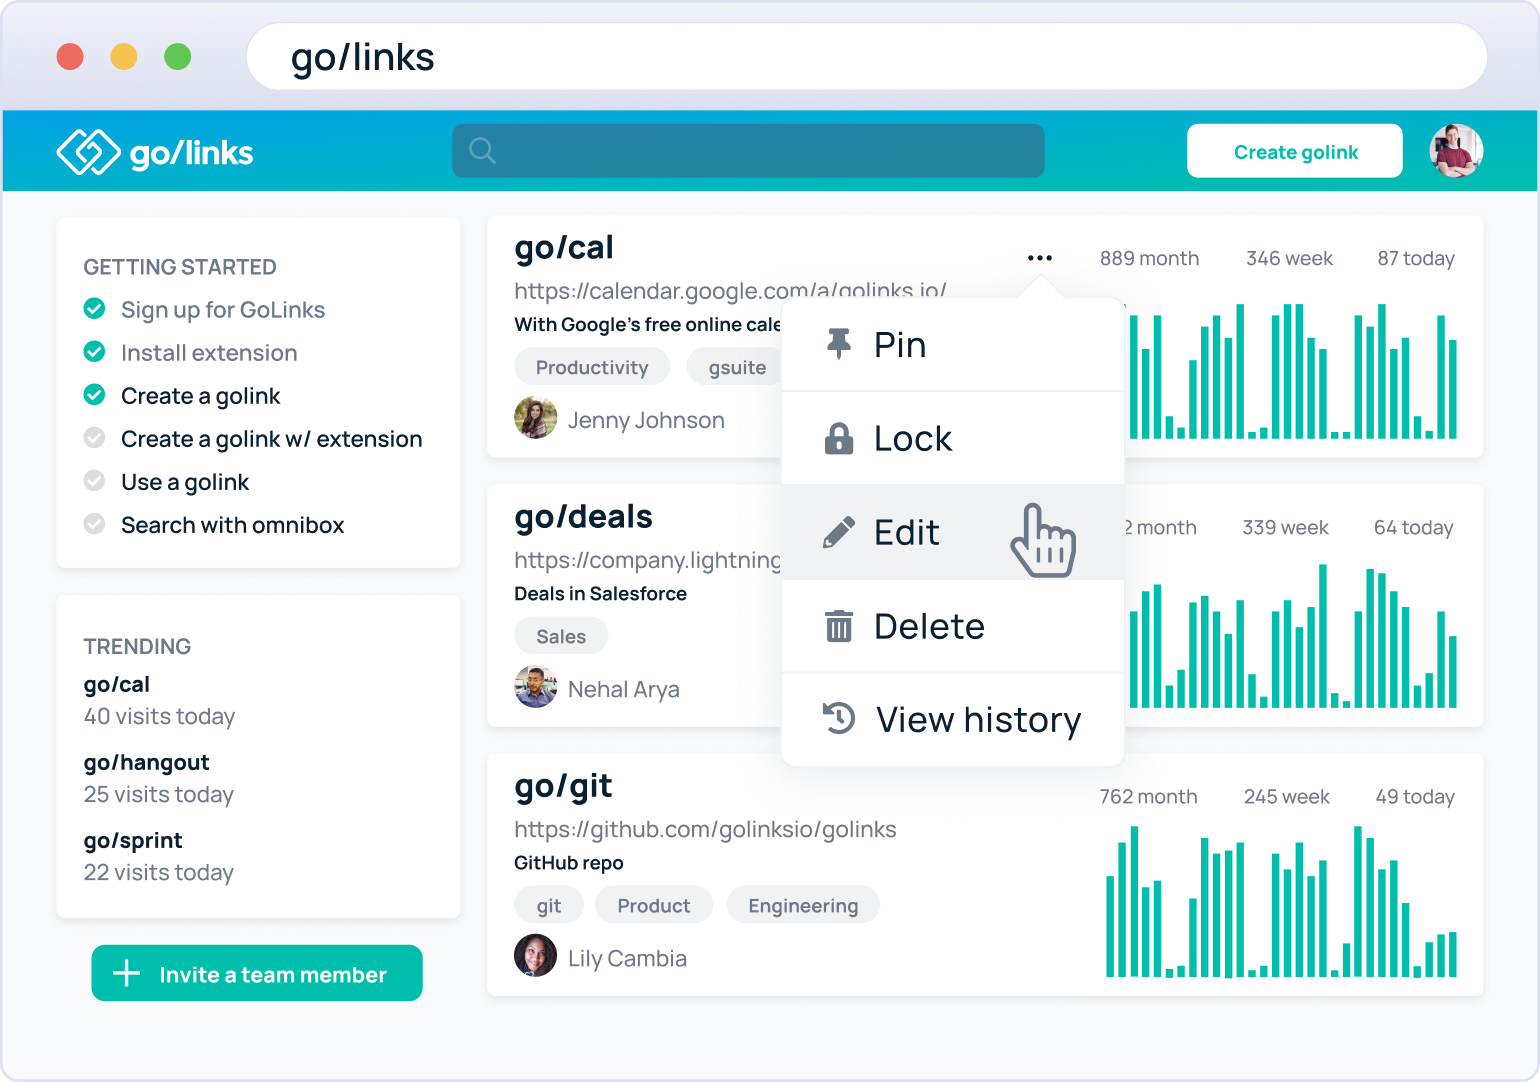 GoLink dashboard showing users how to edit a go link